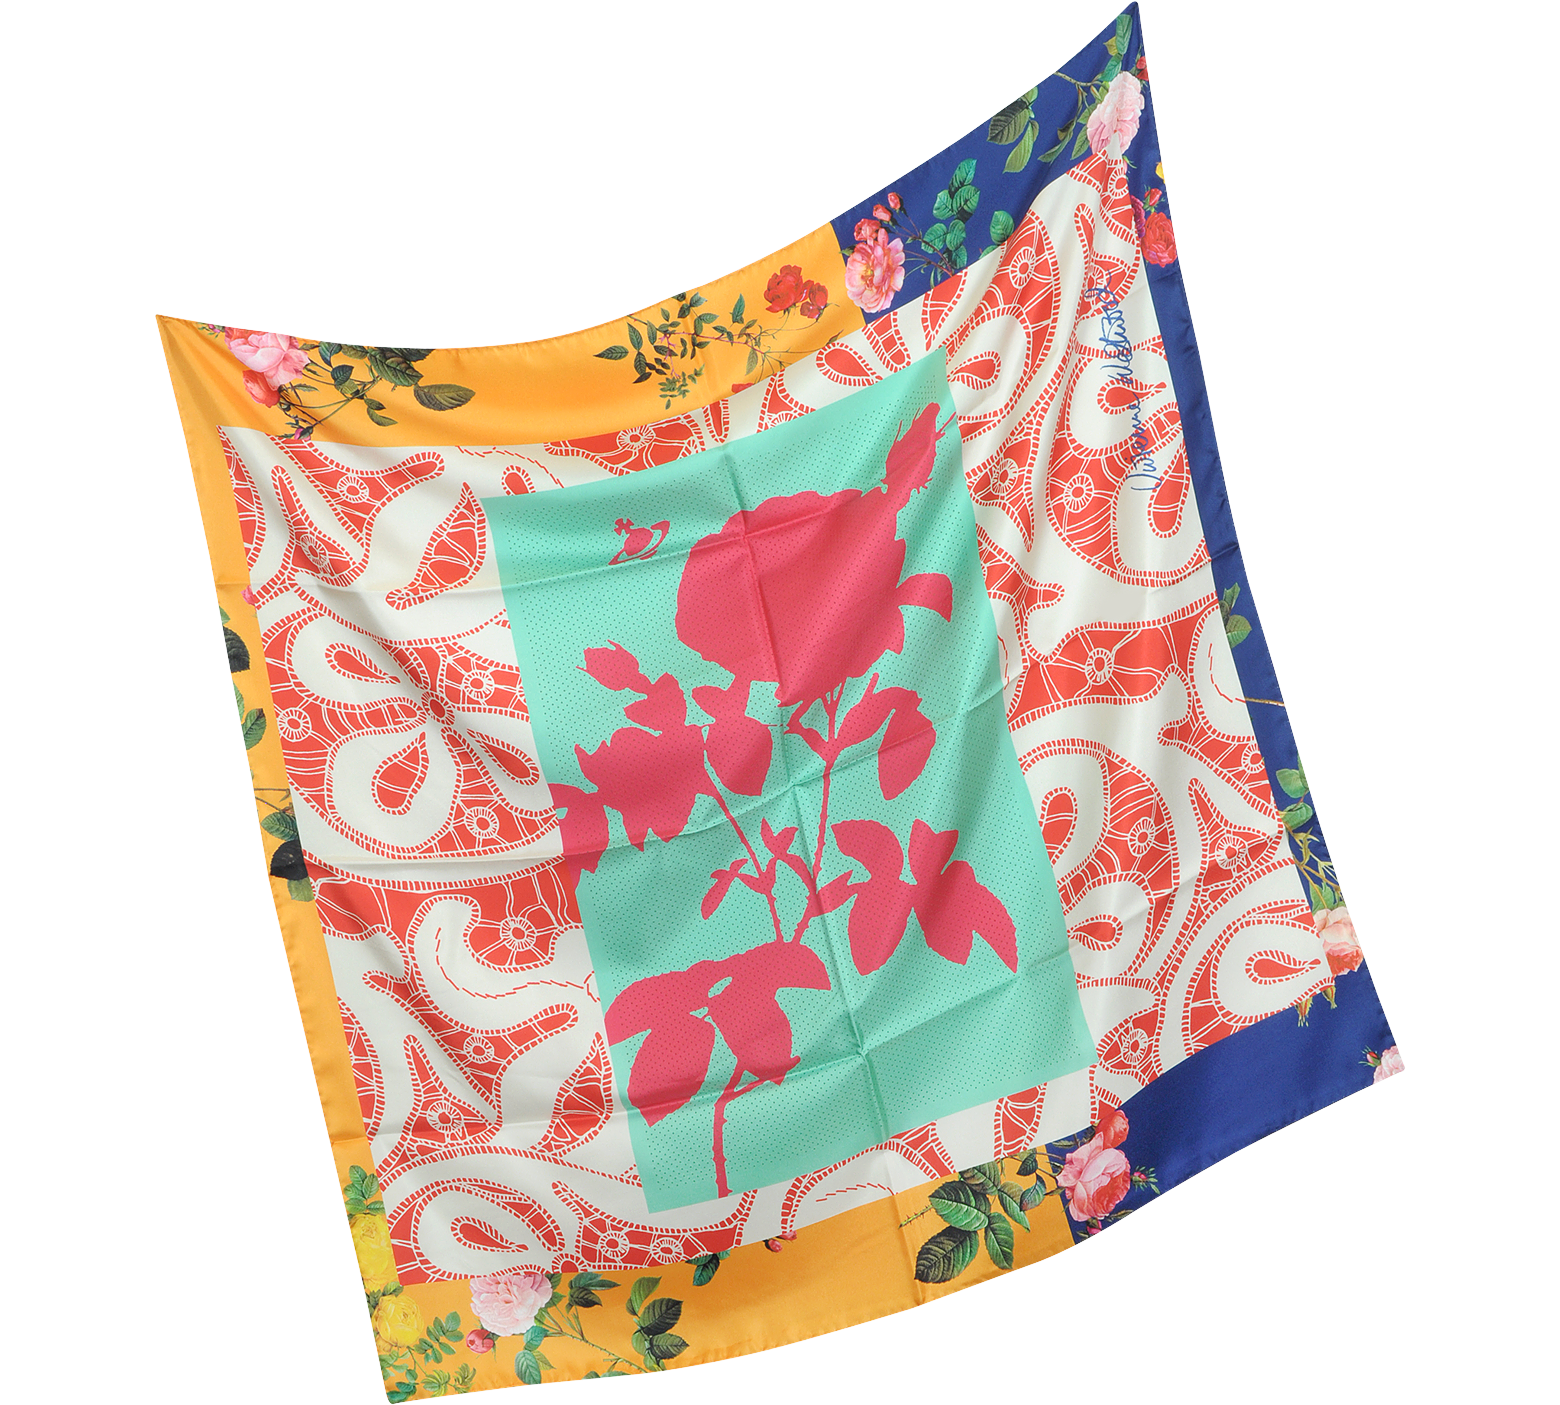 Vivienne Westwood Red Rose Print Silk Square Scarf at FORZIERI